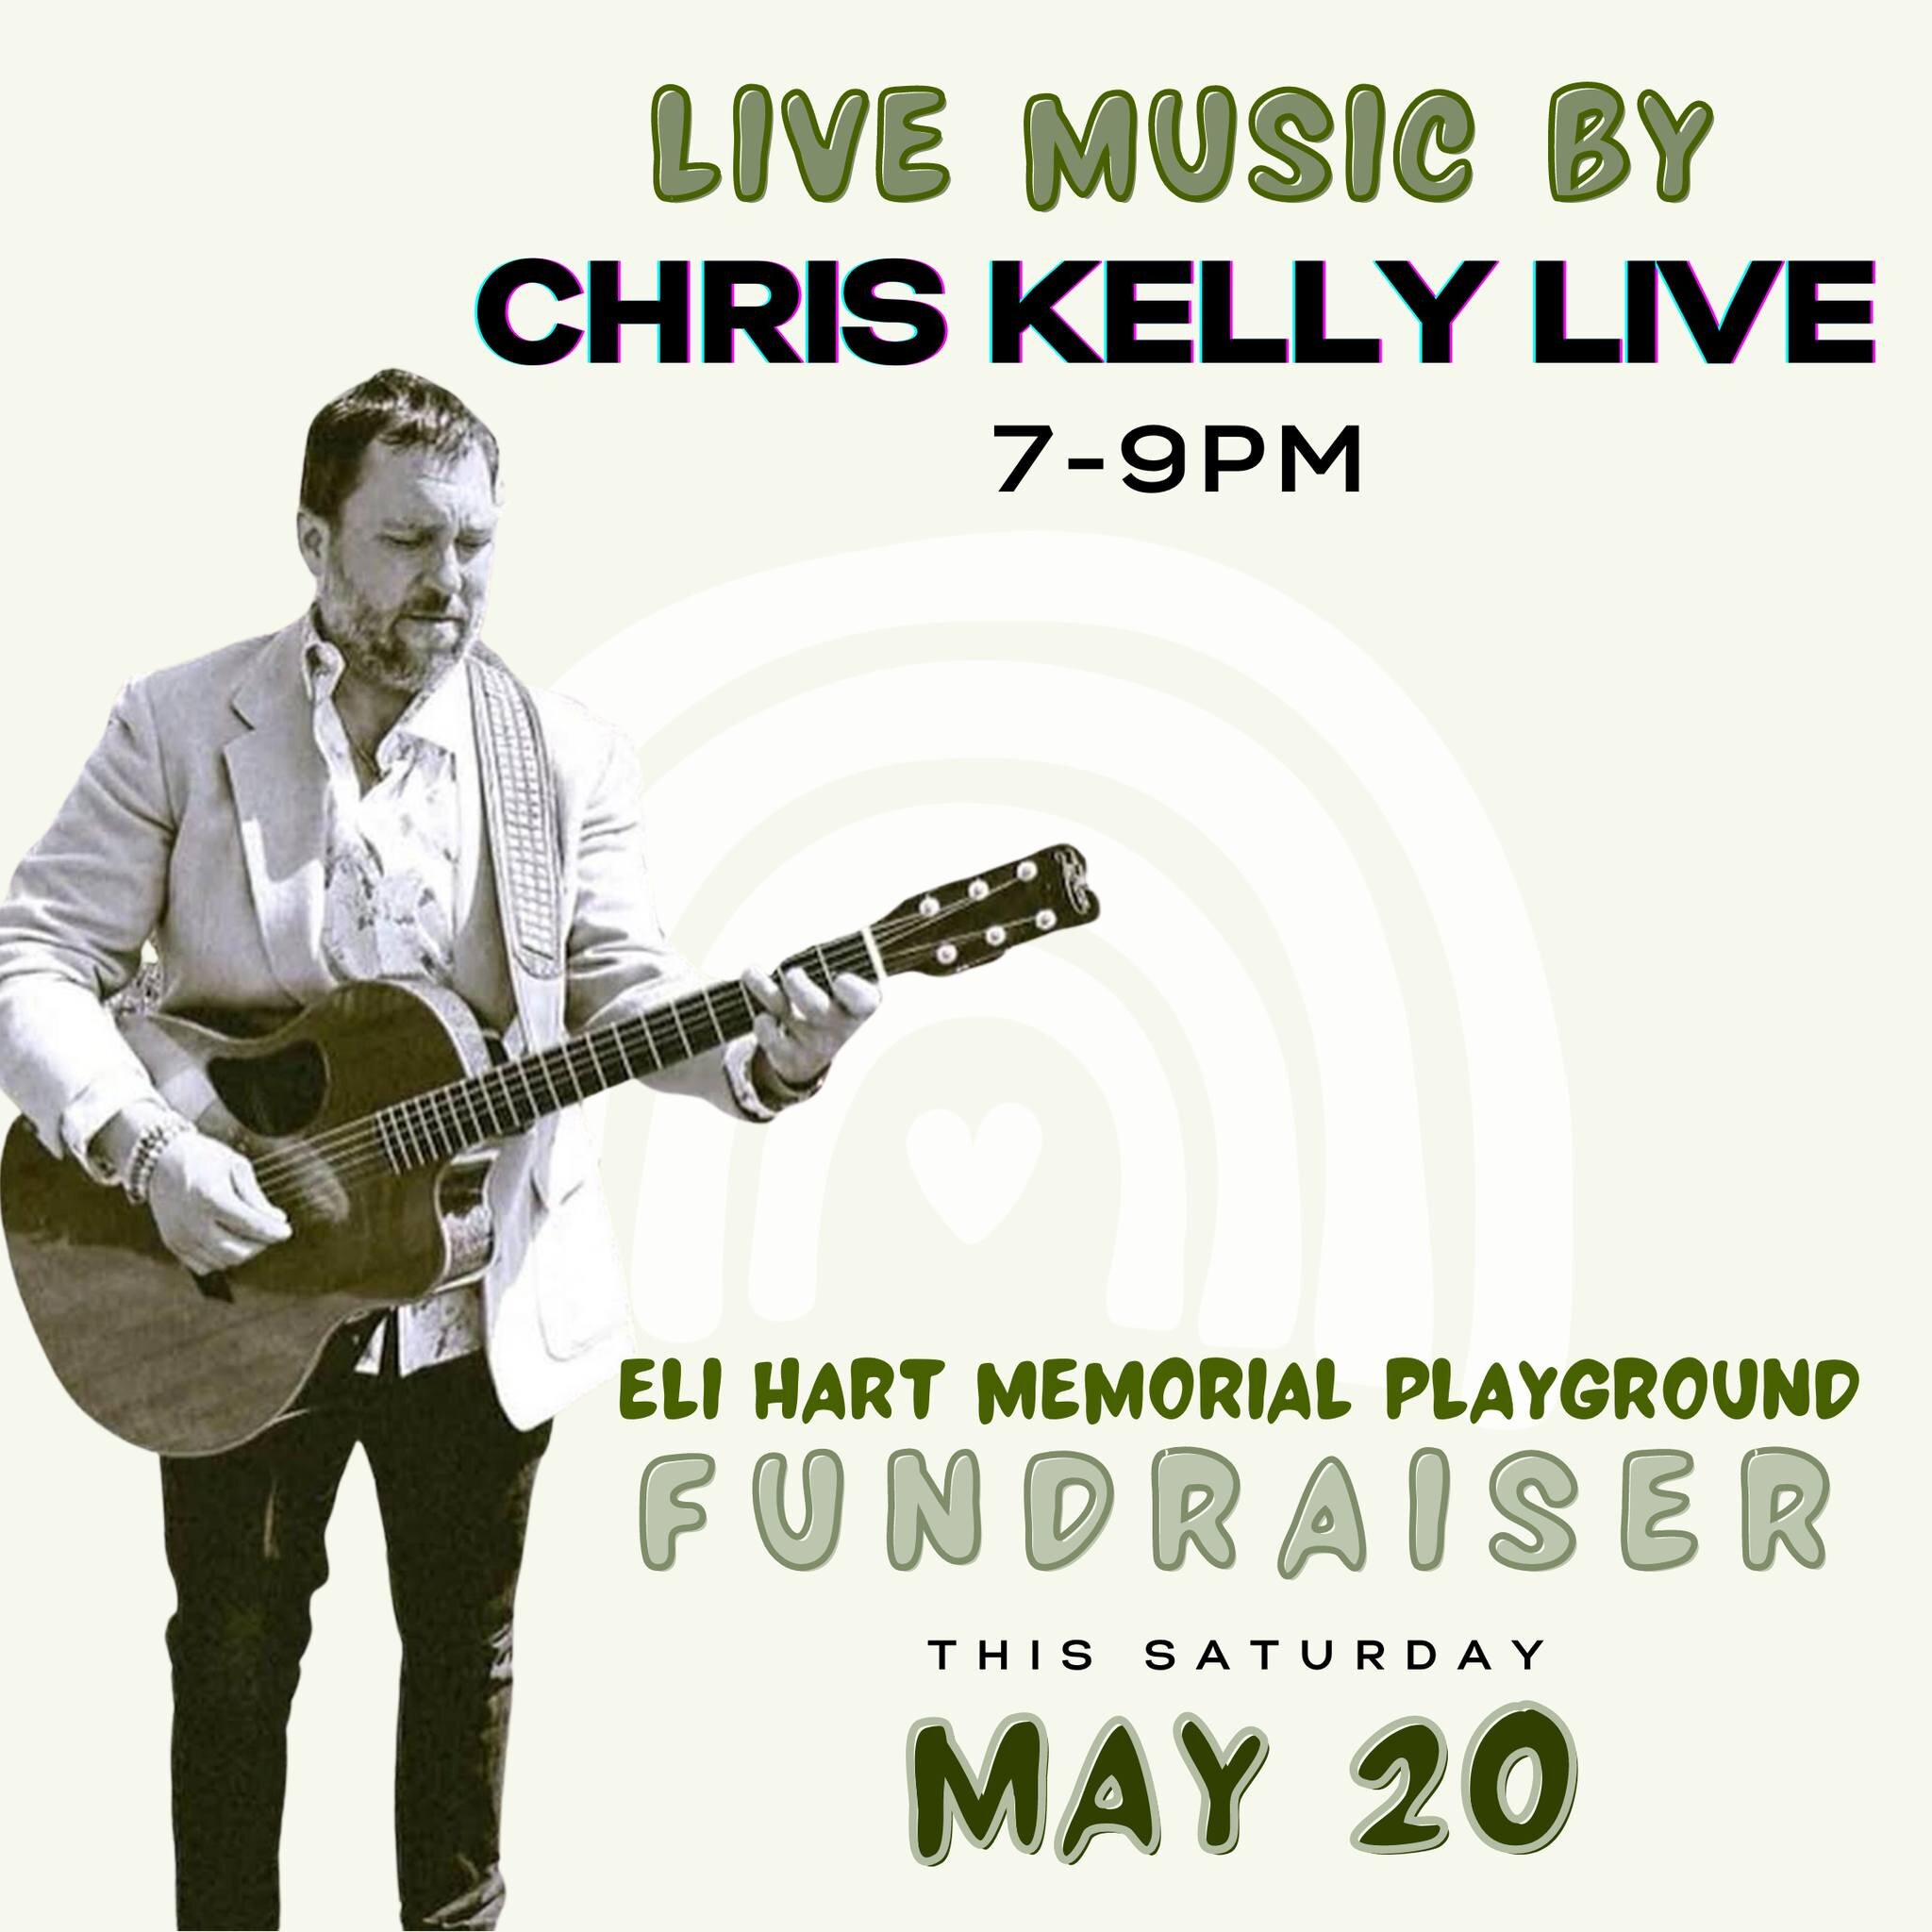 Huge thank you to Chris Kelly Live for graciously playing live music at our fundraiser on Saturday. We can't wait to have one of our favorite artists there supporting the cause! 🫶 🎤 💚